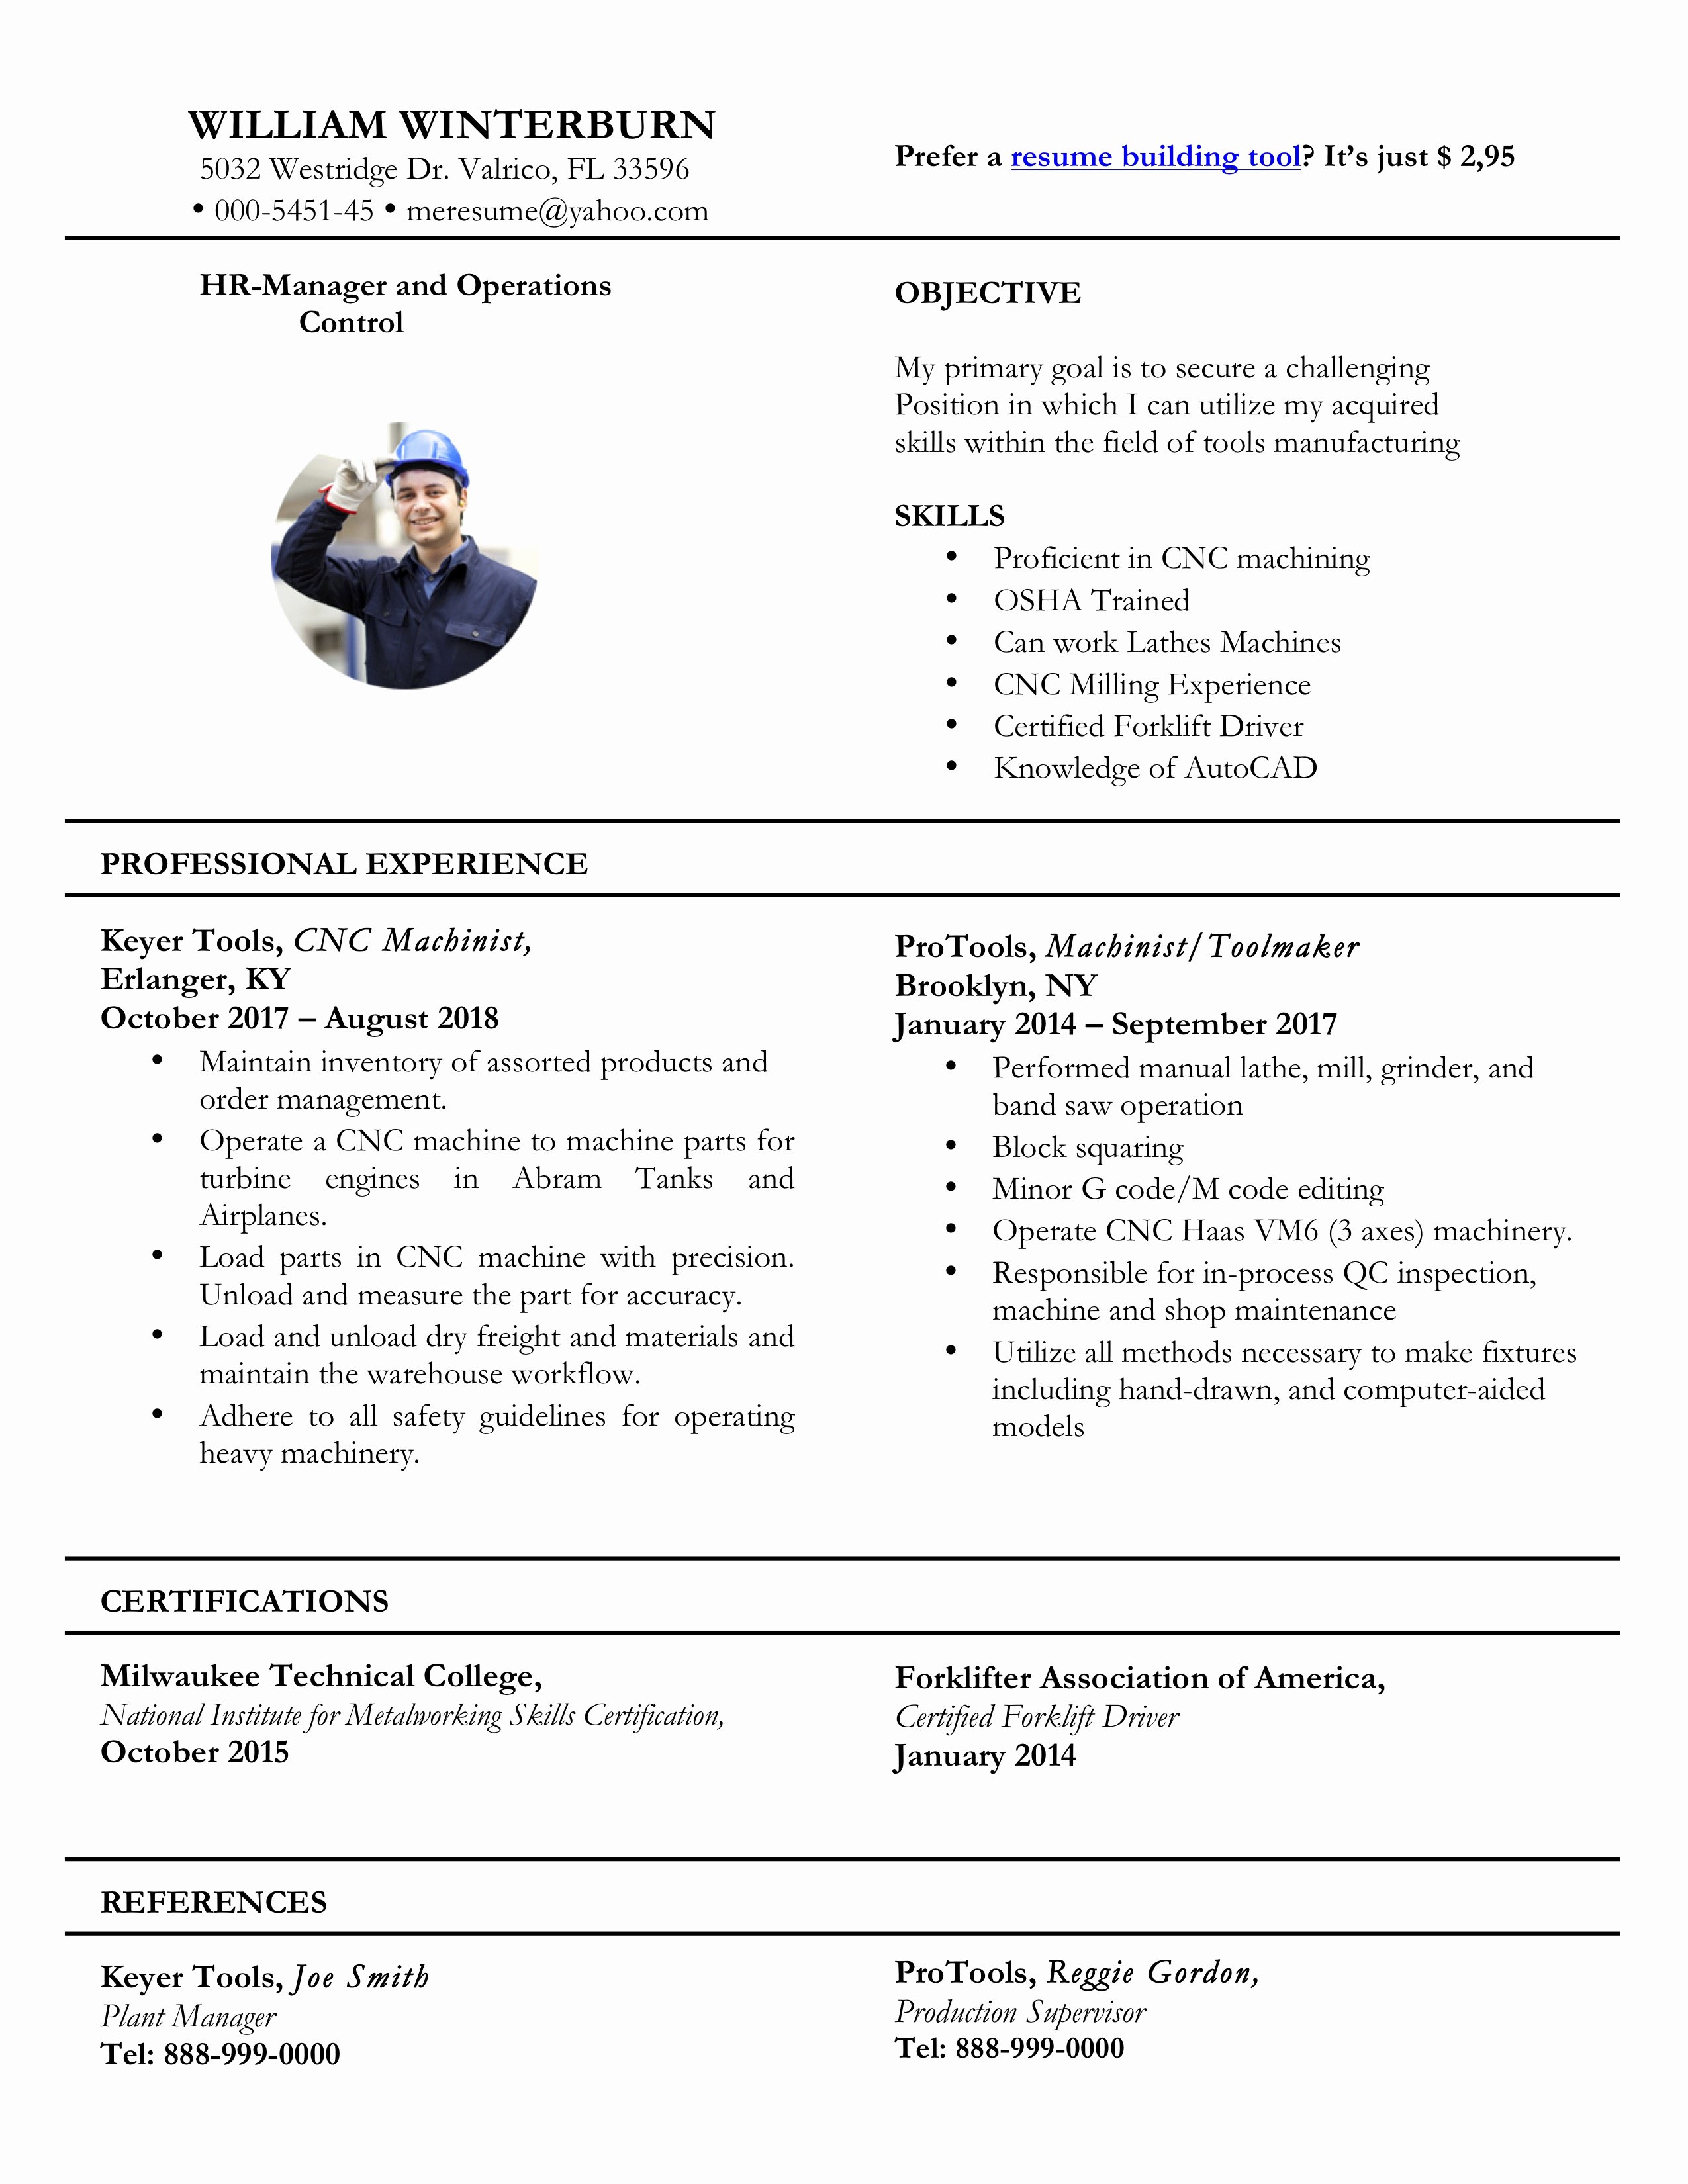 Microsoft Word Resume Example Best Of Resume Templates [2019] Pdf and Word